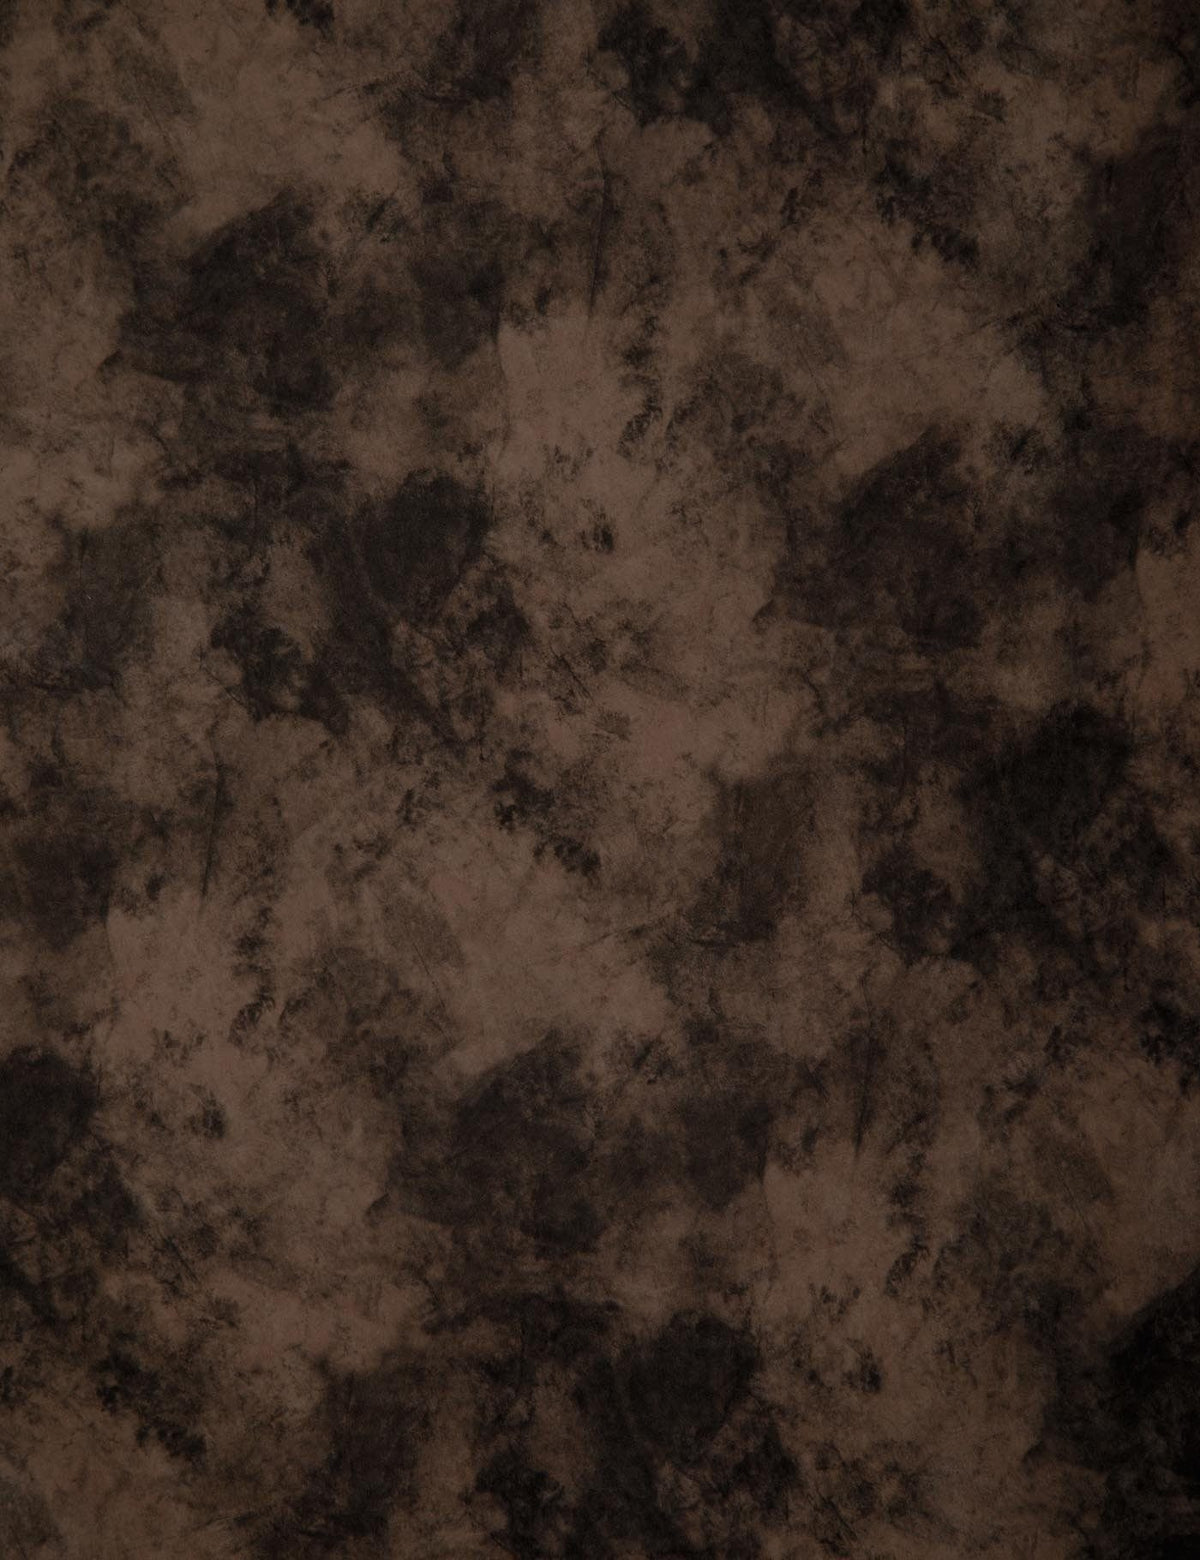 Abstract Brown And Black Intermixed For Portrait Photography Backdrop J-0624 Shopbackdrop